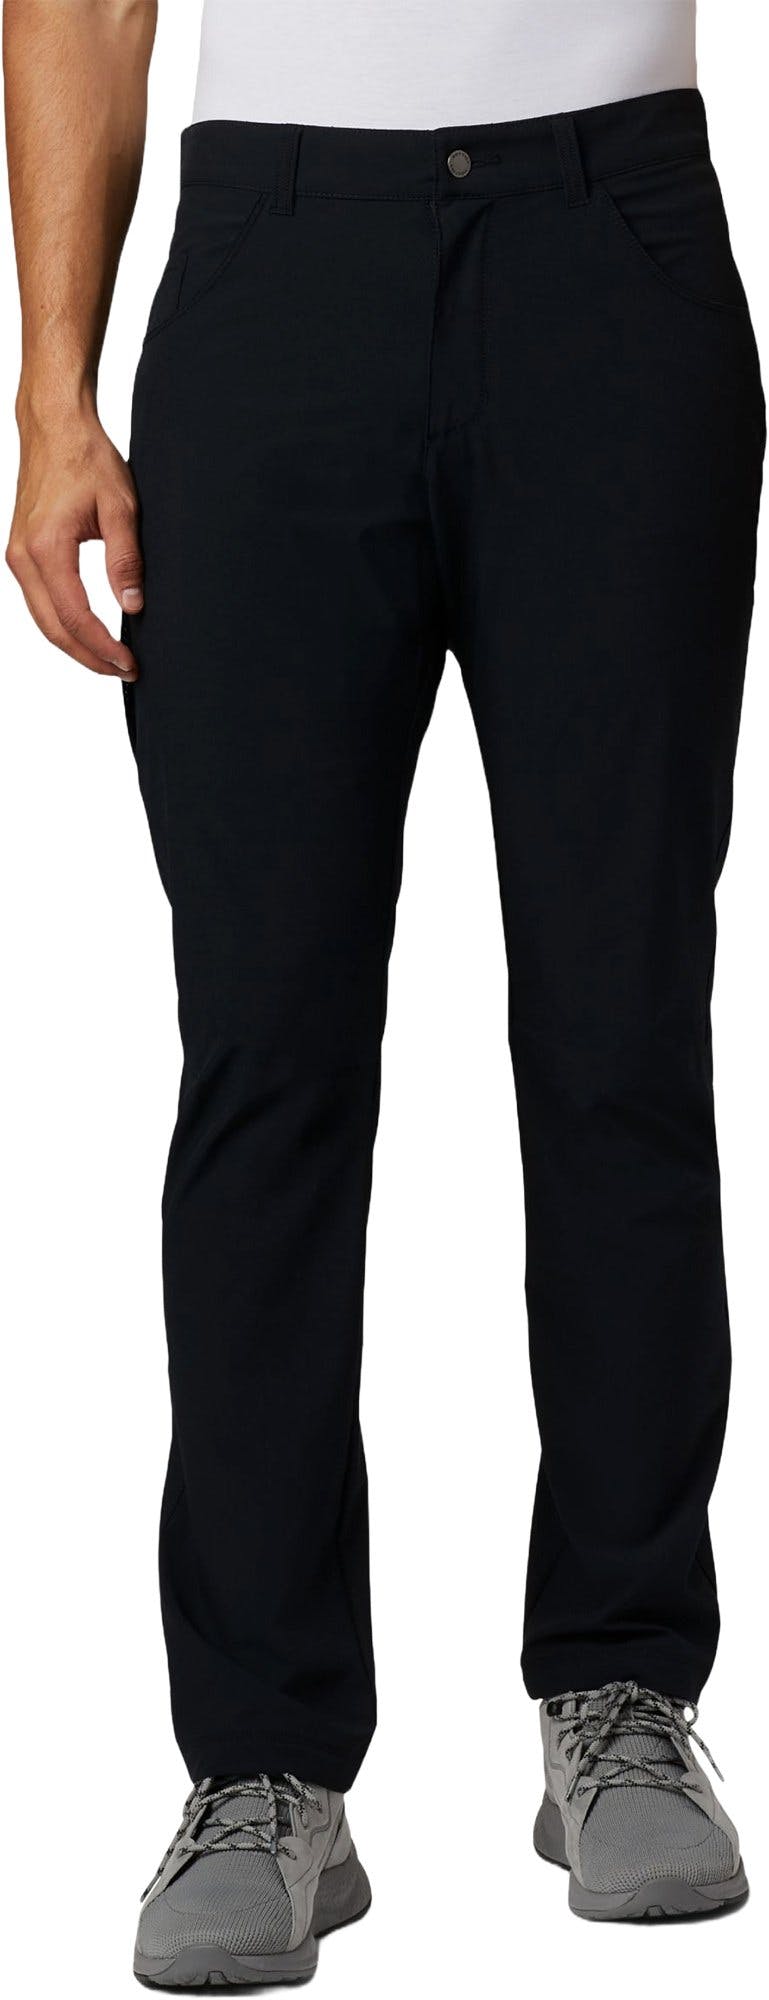 Product image for Outdoor Elements Stretch Pant - Men's